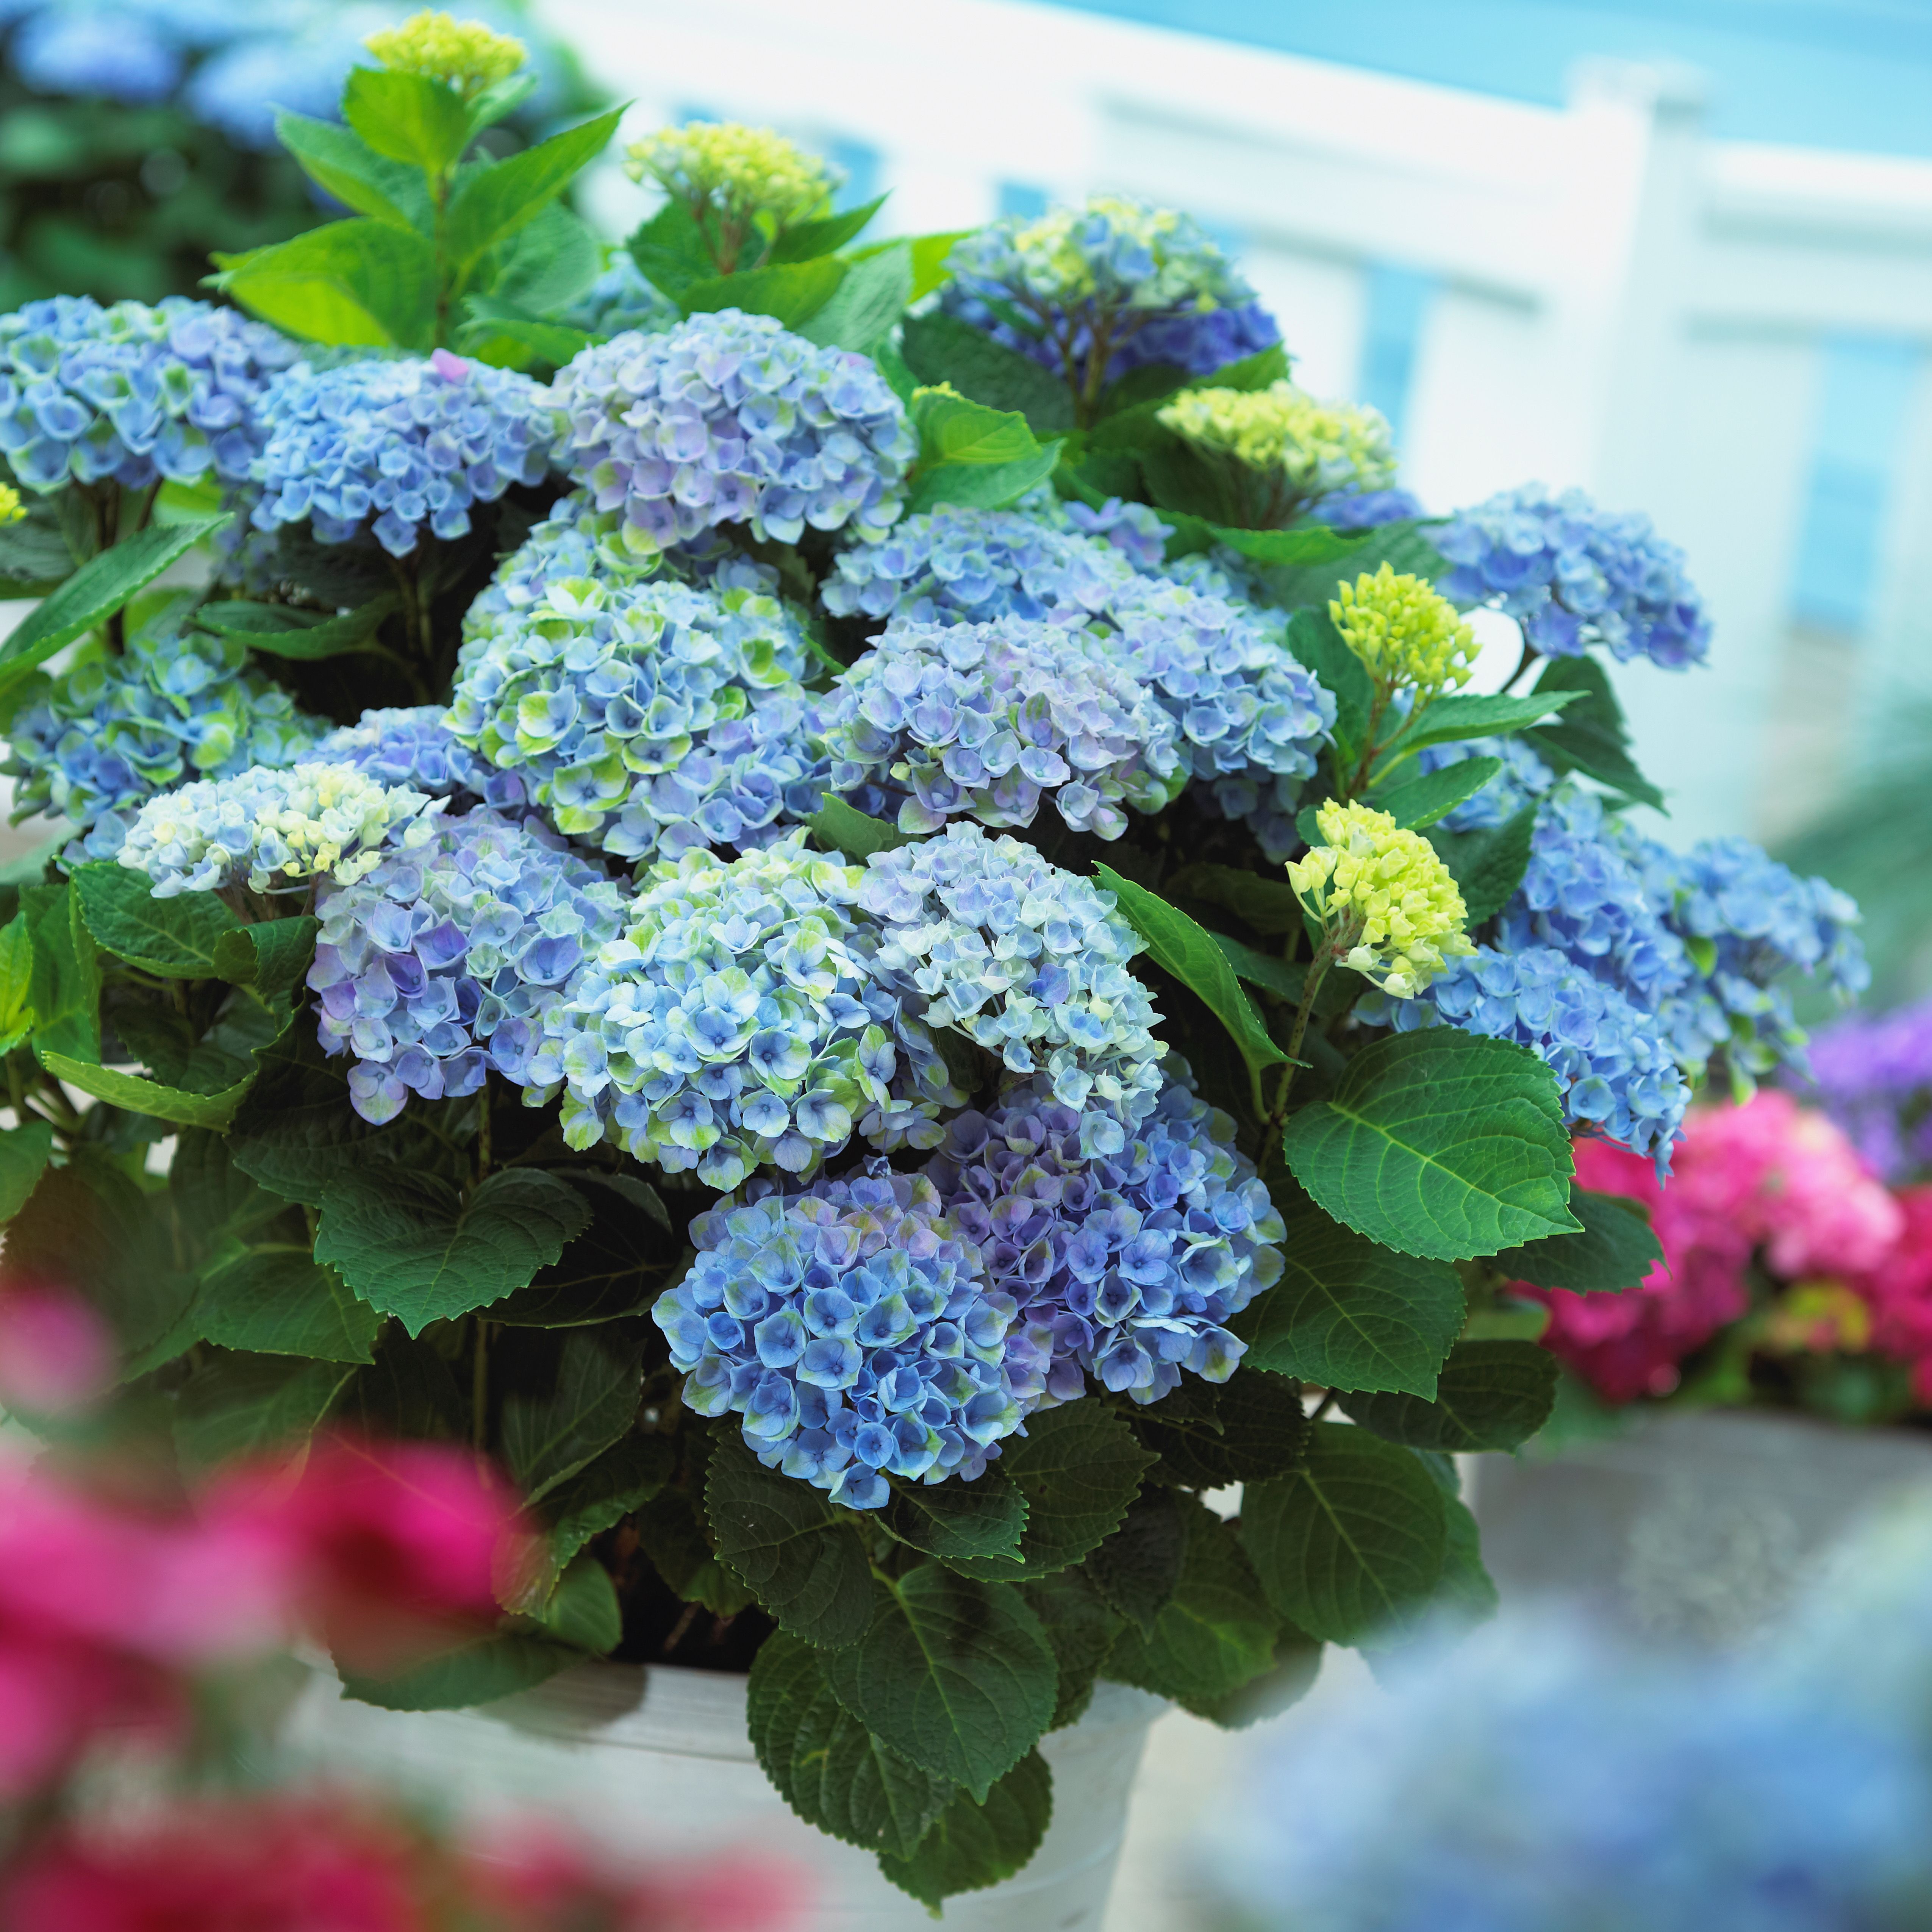 images/plants/hydrangea/hyd-magical-everlasting-revolution/hyd-magical-everlasting-revolution-0124.jpg